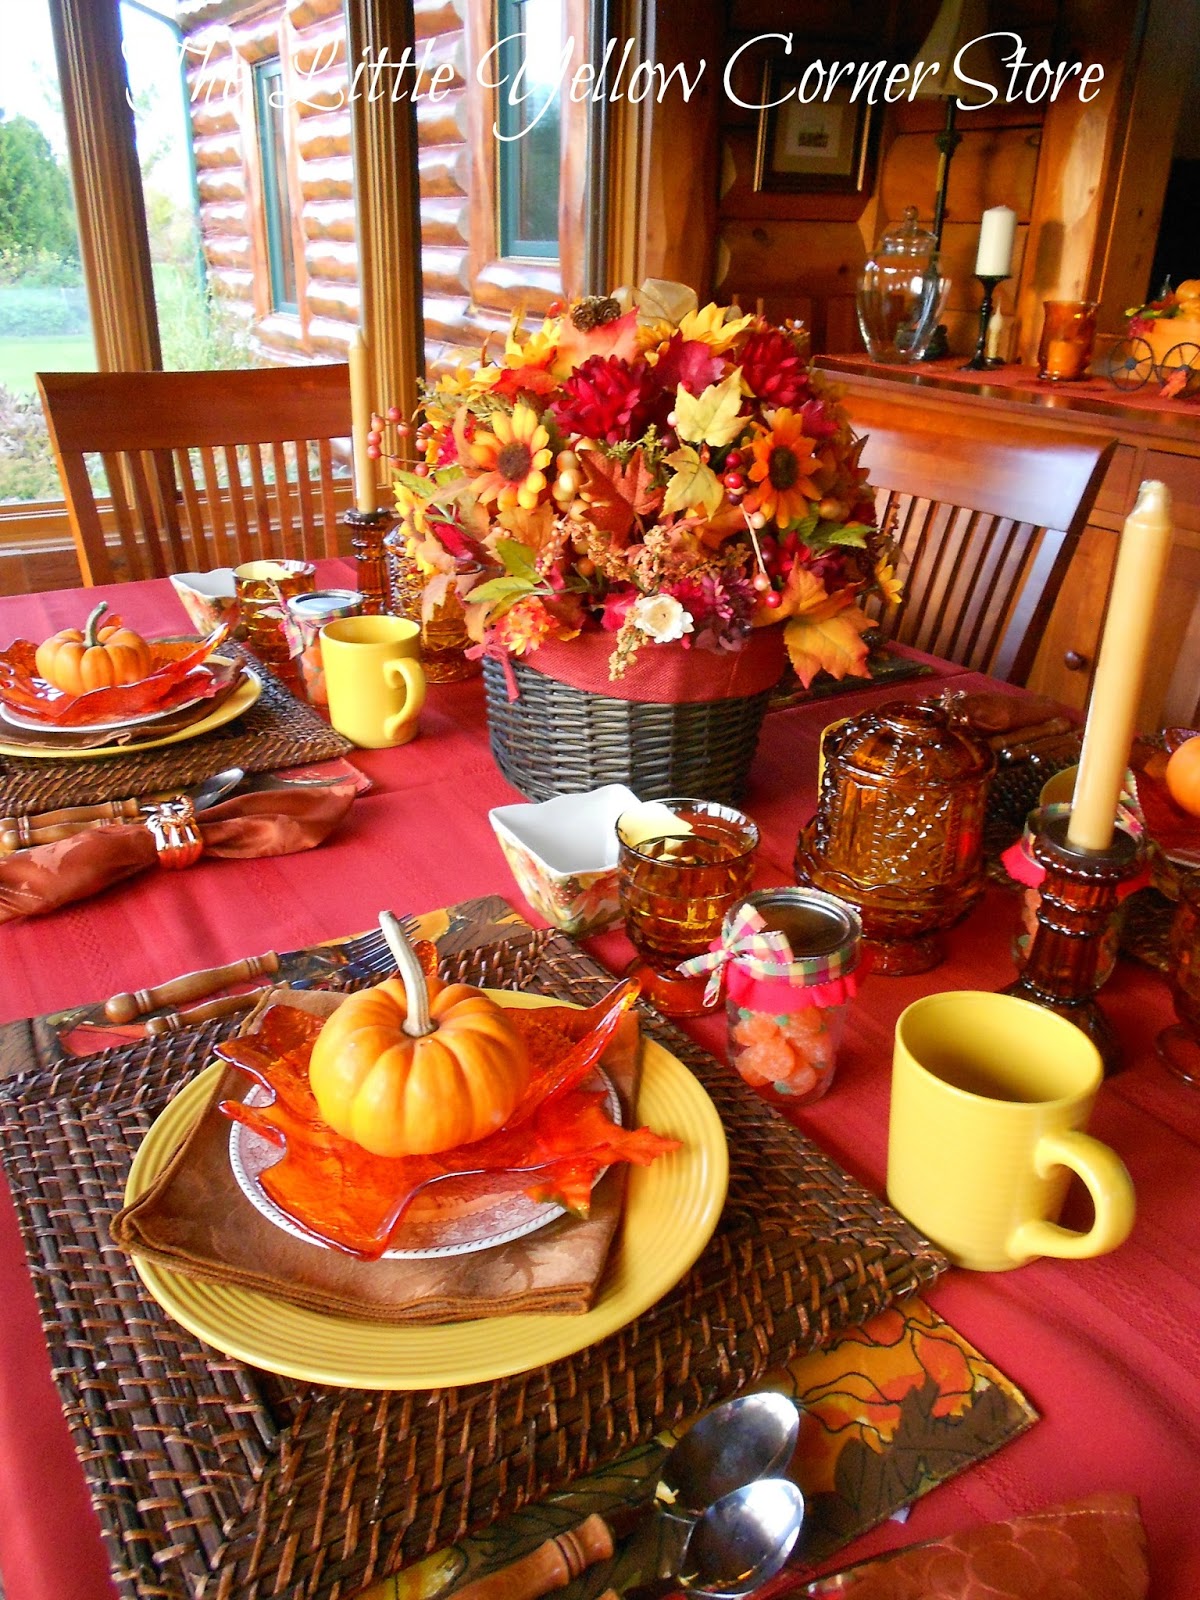 The Little Yellow Corner Store: That Cozy Fall Feeling in a Tablescape